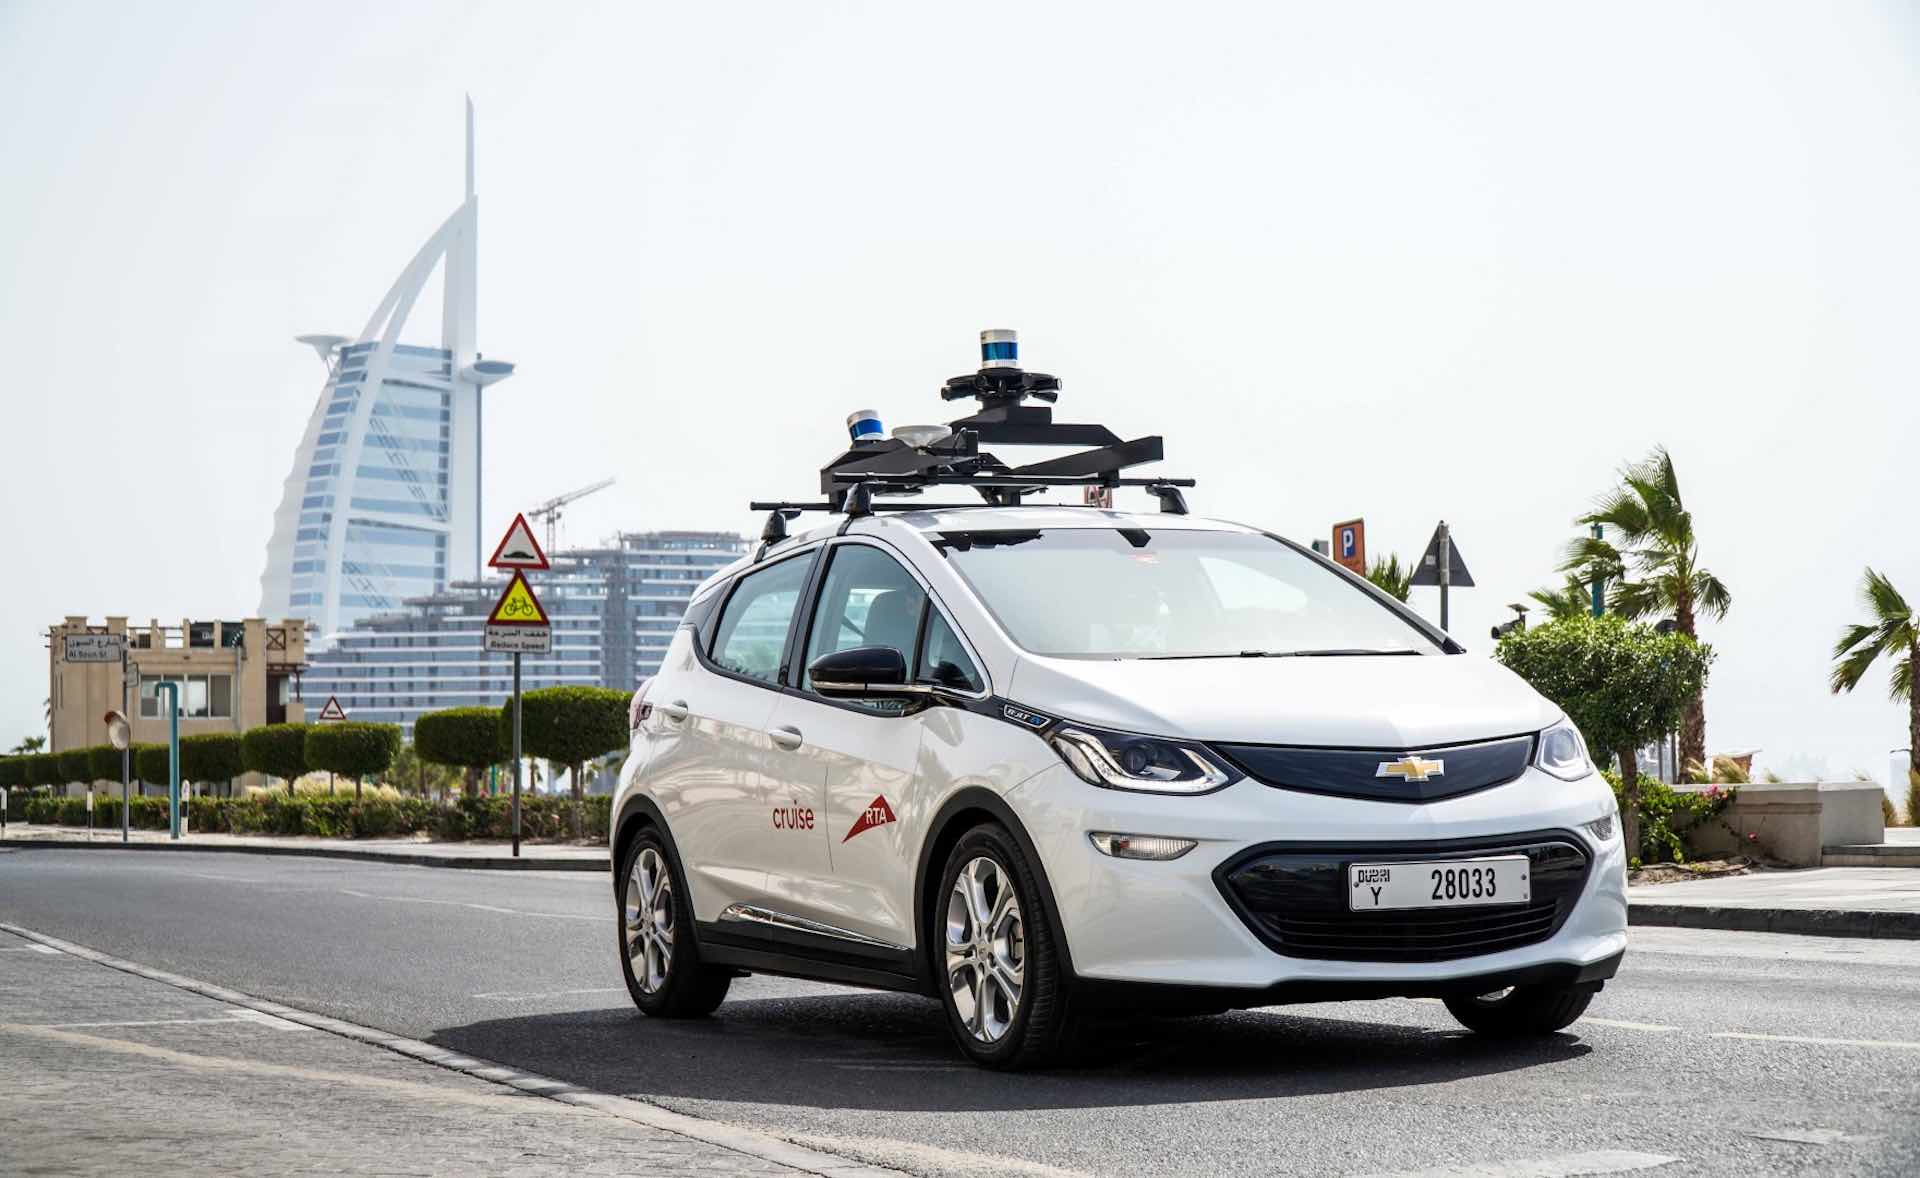 Two electric Chevrolet Bolts to chart digital maps in Dubai